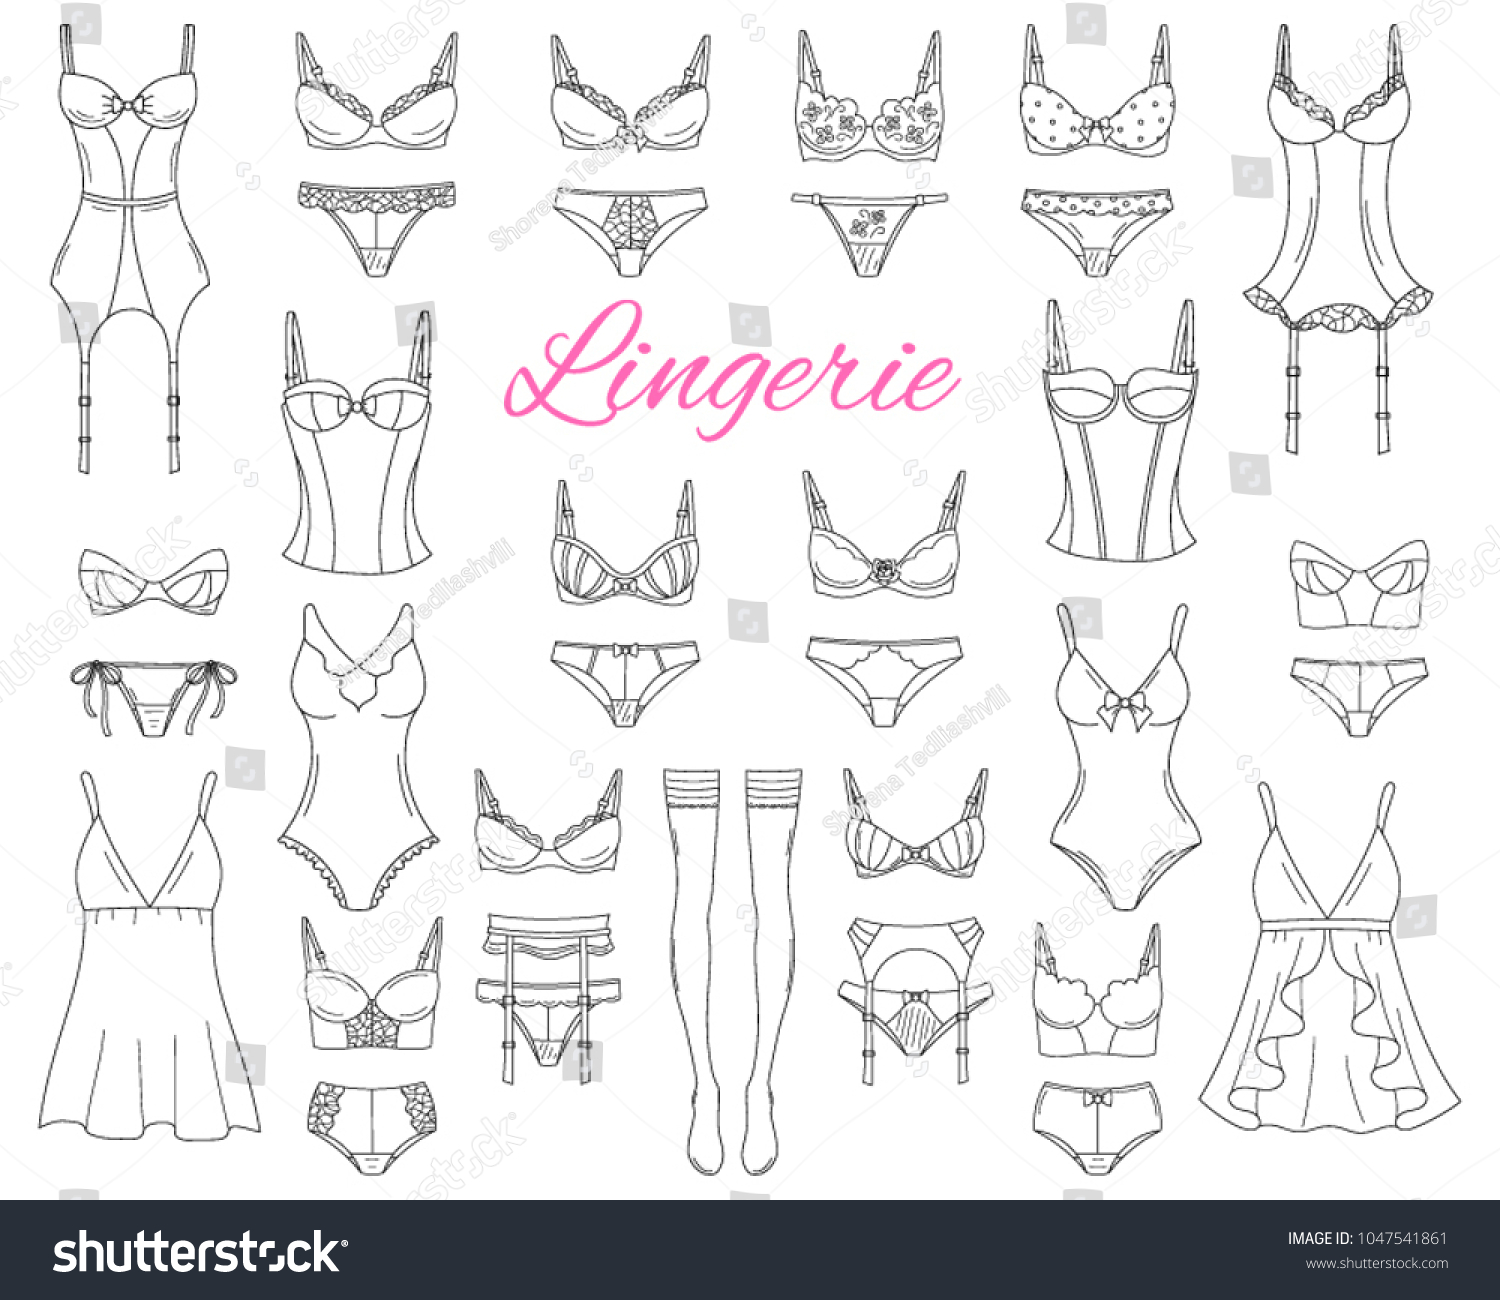 Fashionable Female Lingerie Collection Vector Sketch Stock Vector Royalty Free 1047541861